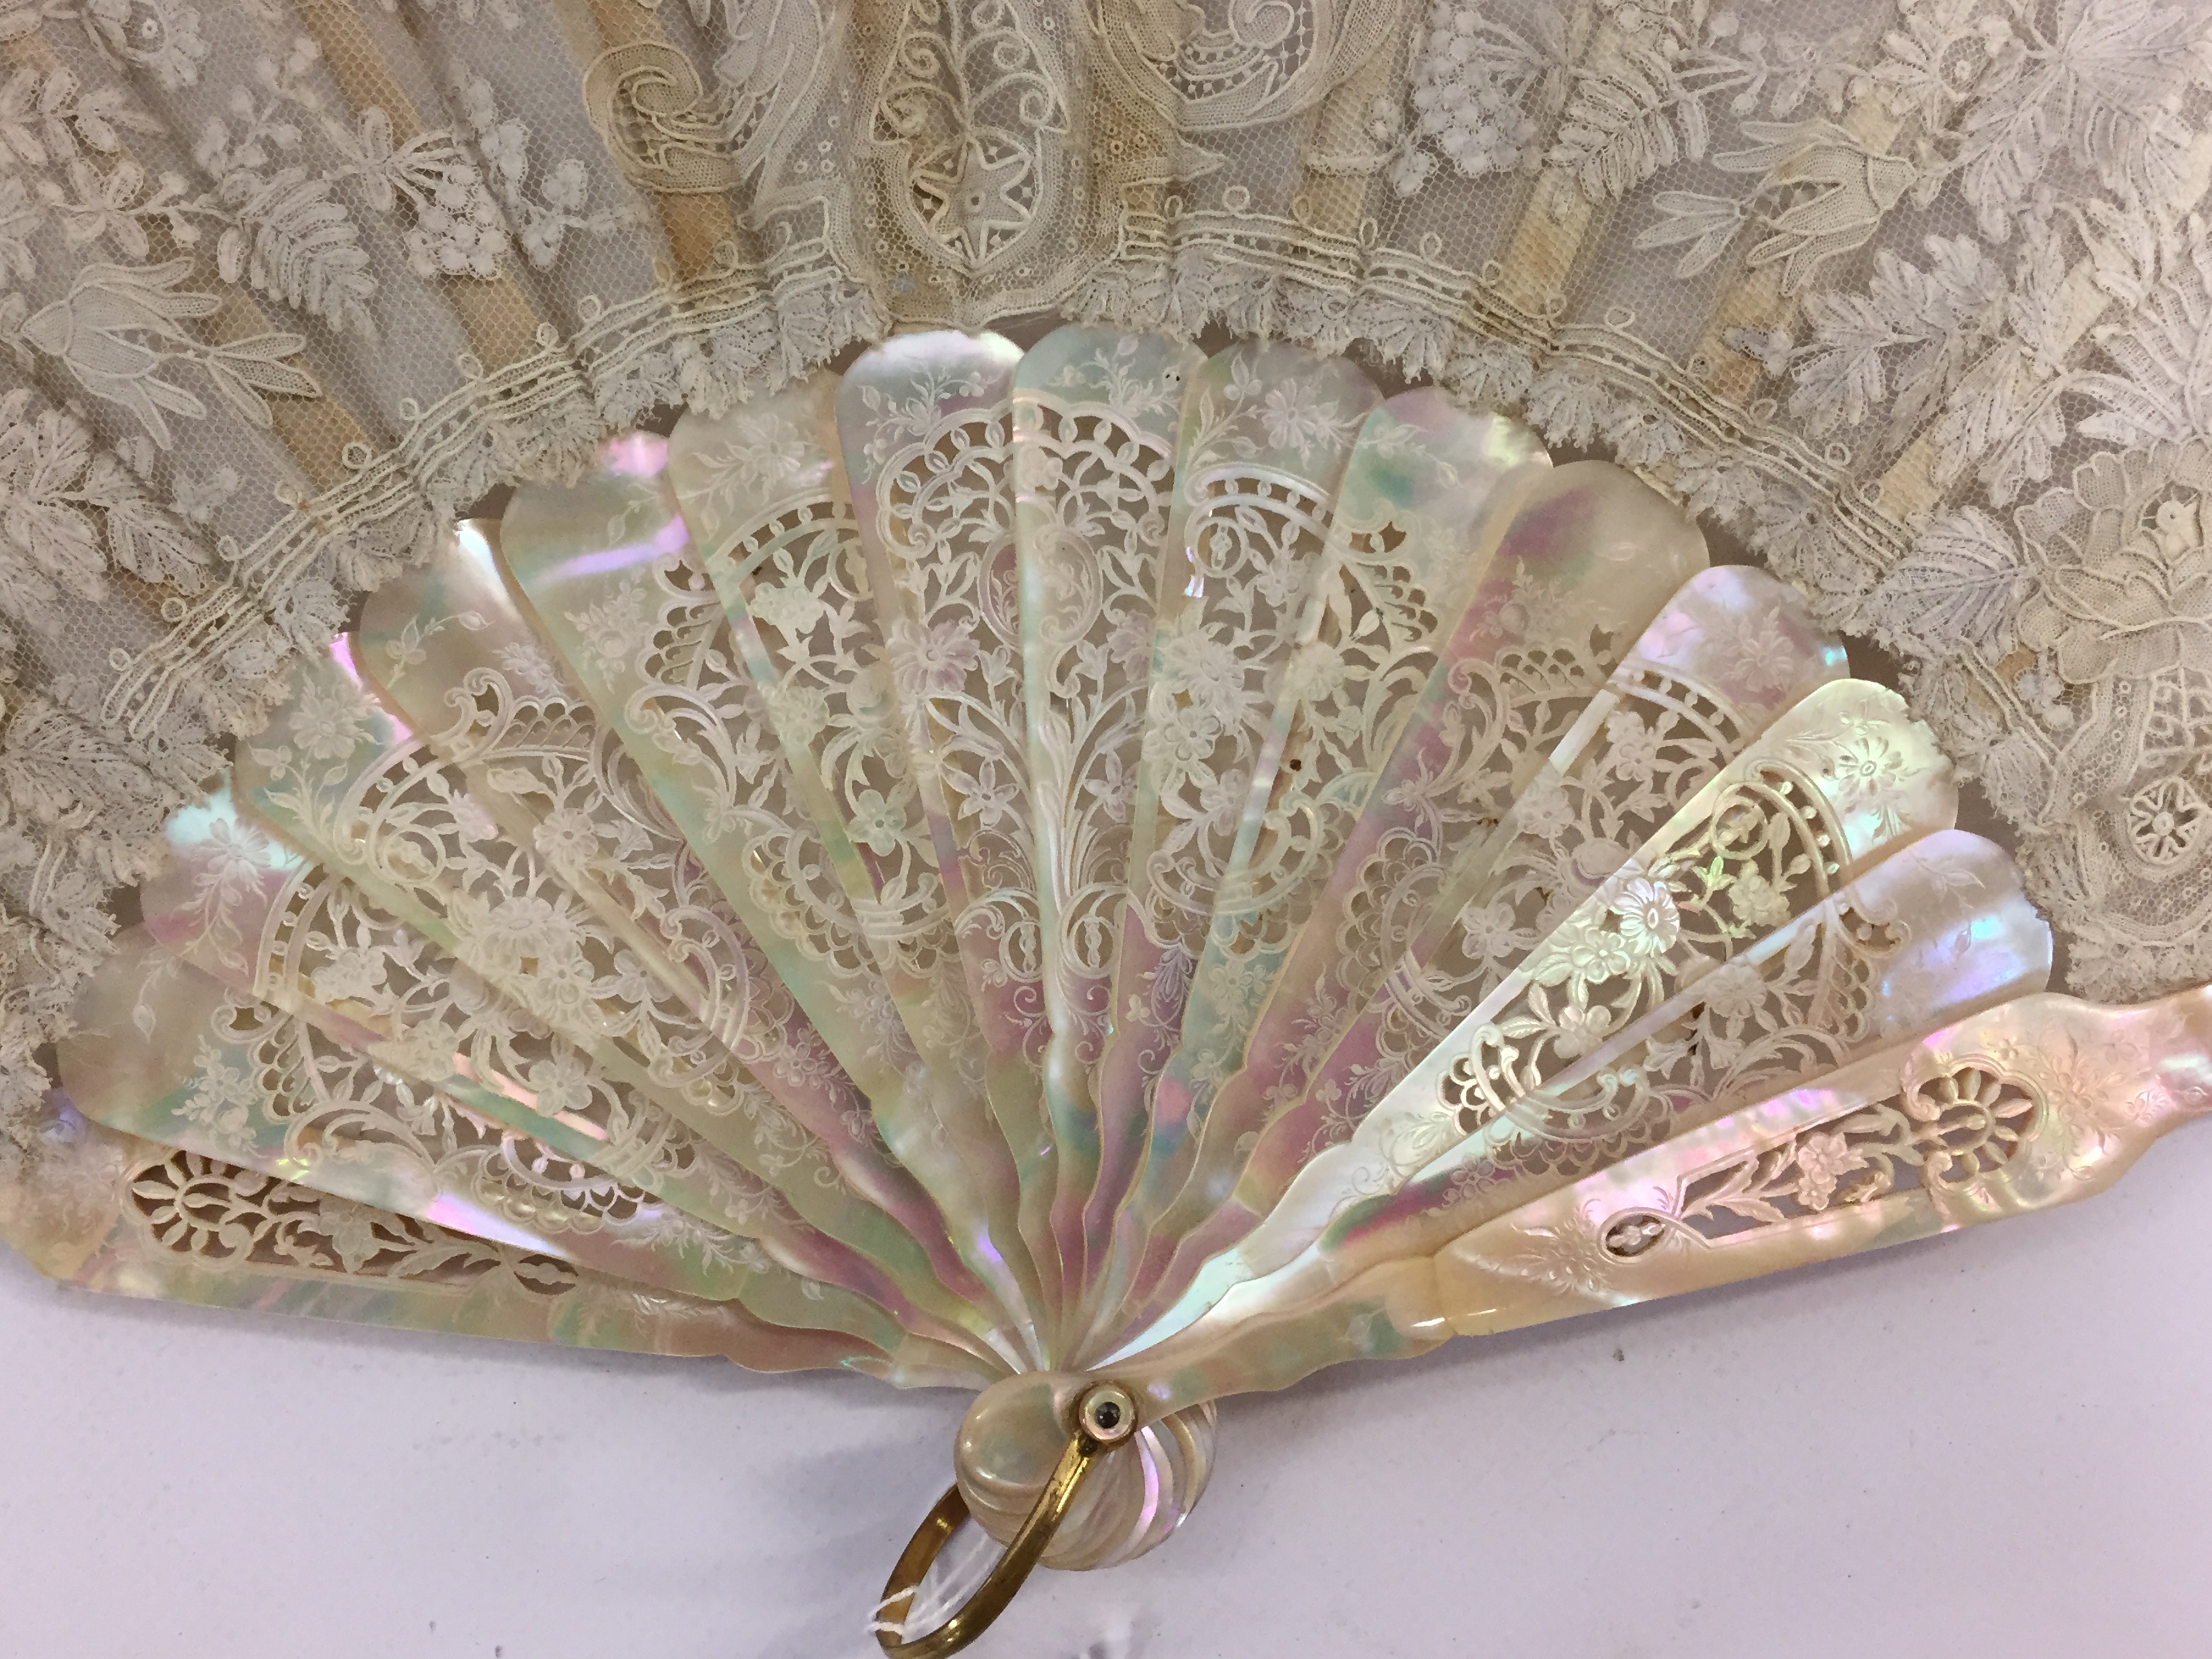 A C19TH FRENCH MOTHER OF PEARL AND SATIN FAN WITH LACE , PRESENTED IN CARDBOARD BOX, - Image 3 of 3